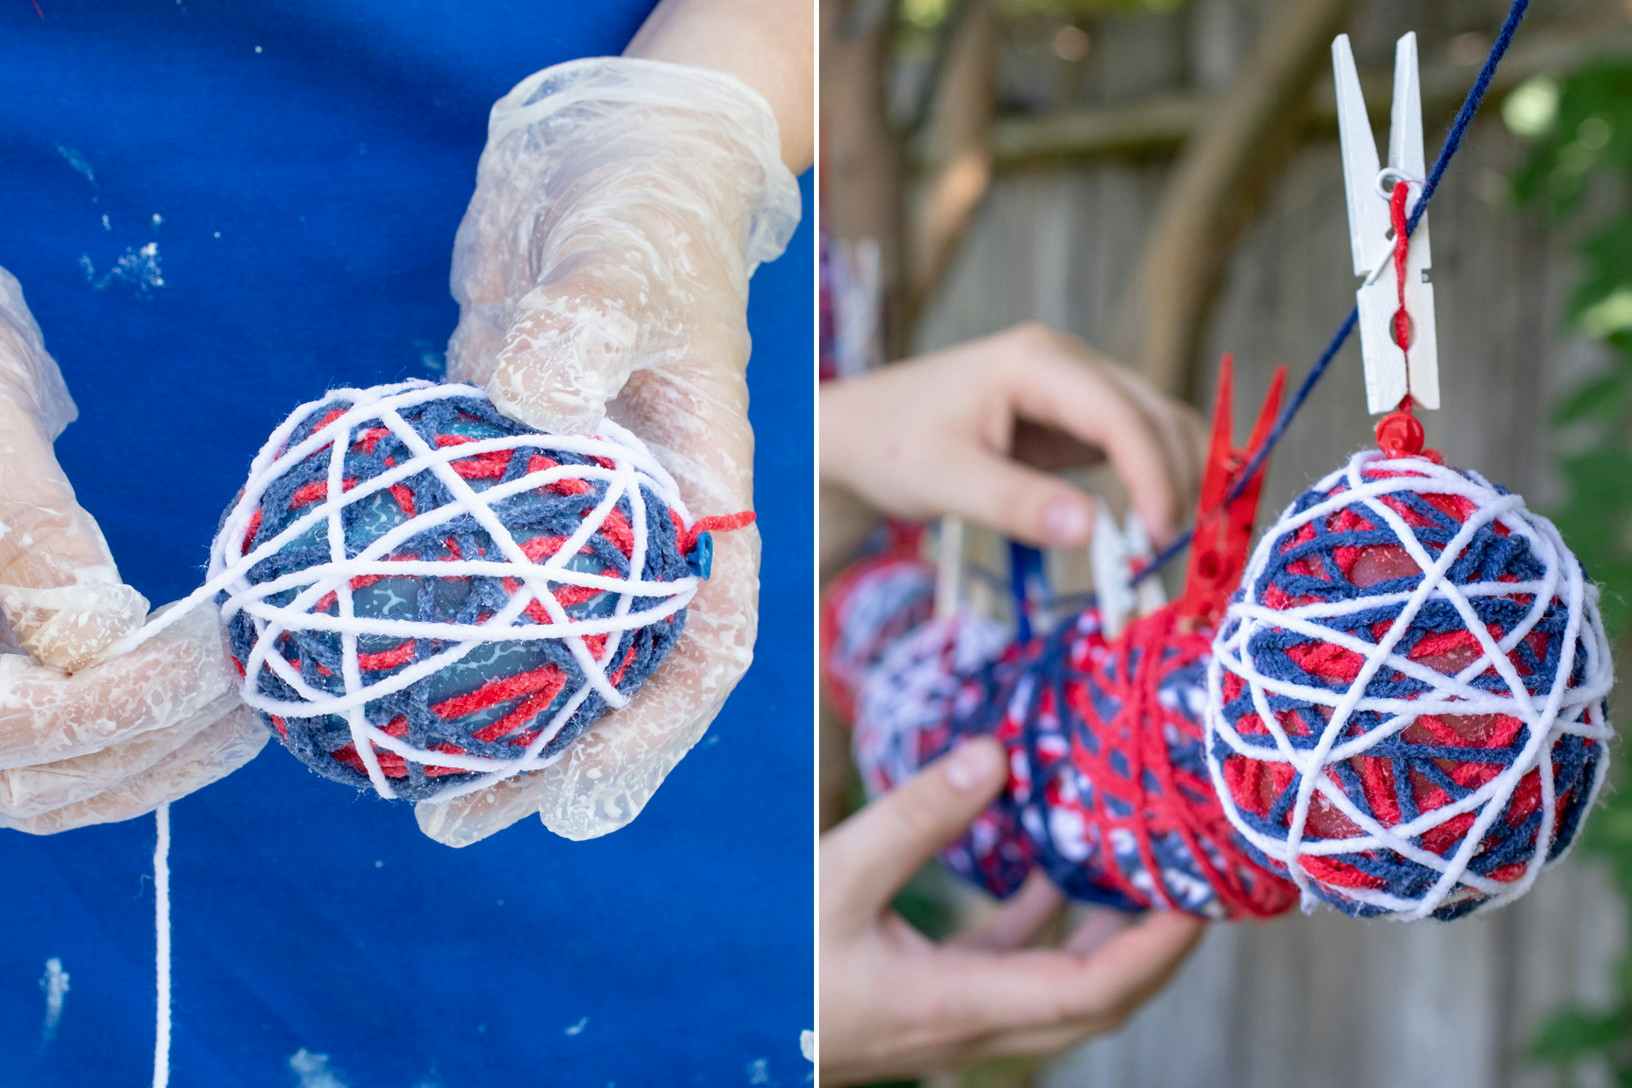 A person wrapping glue-covered strings of yarn over a small, inflated balloon, and clipping them onto a clothesline to dry.